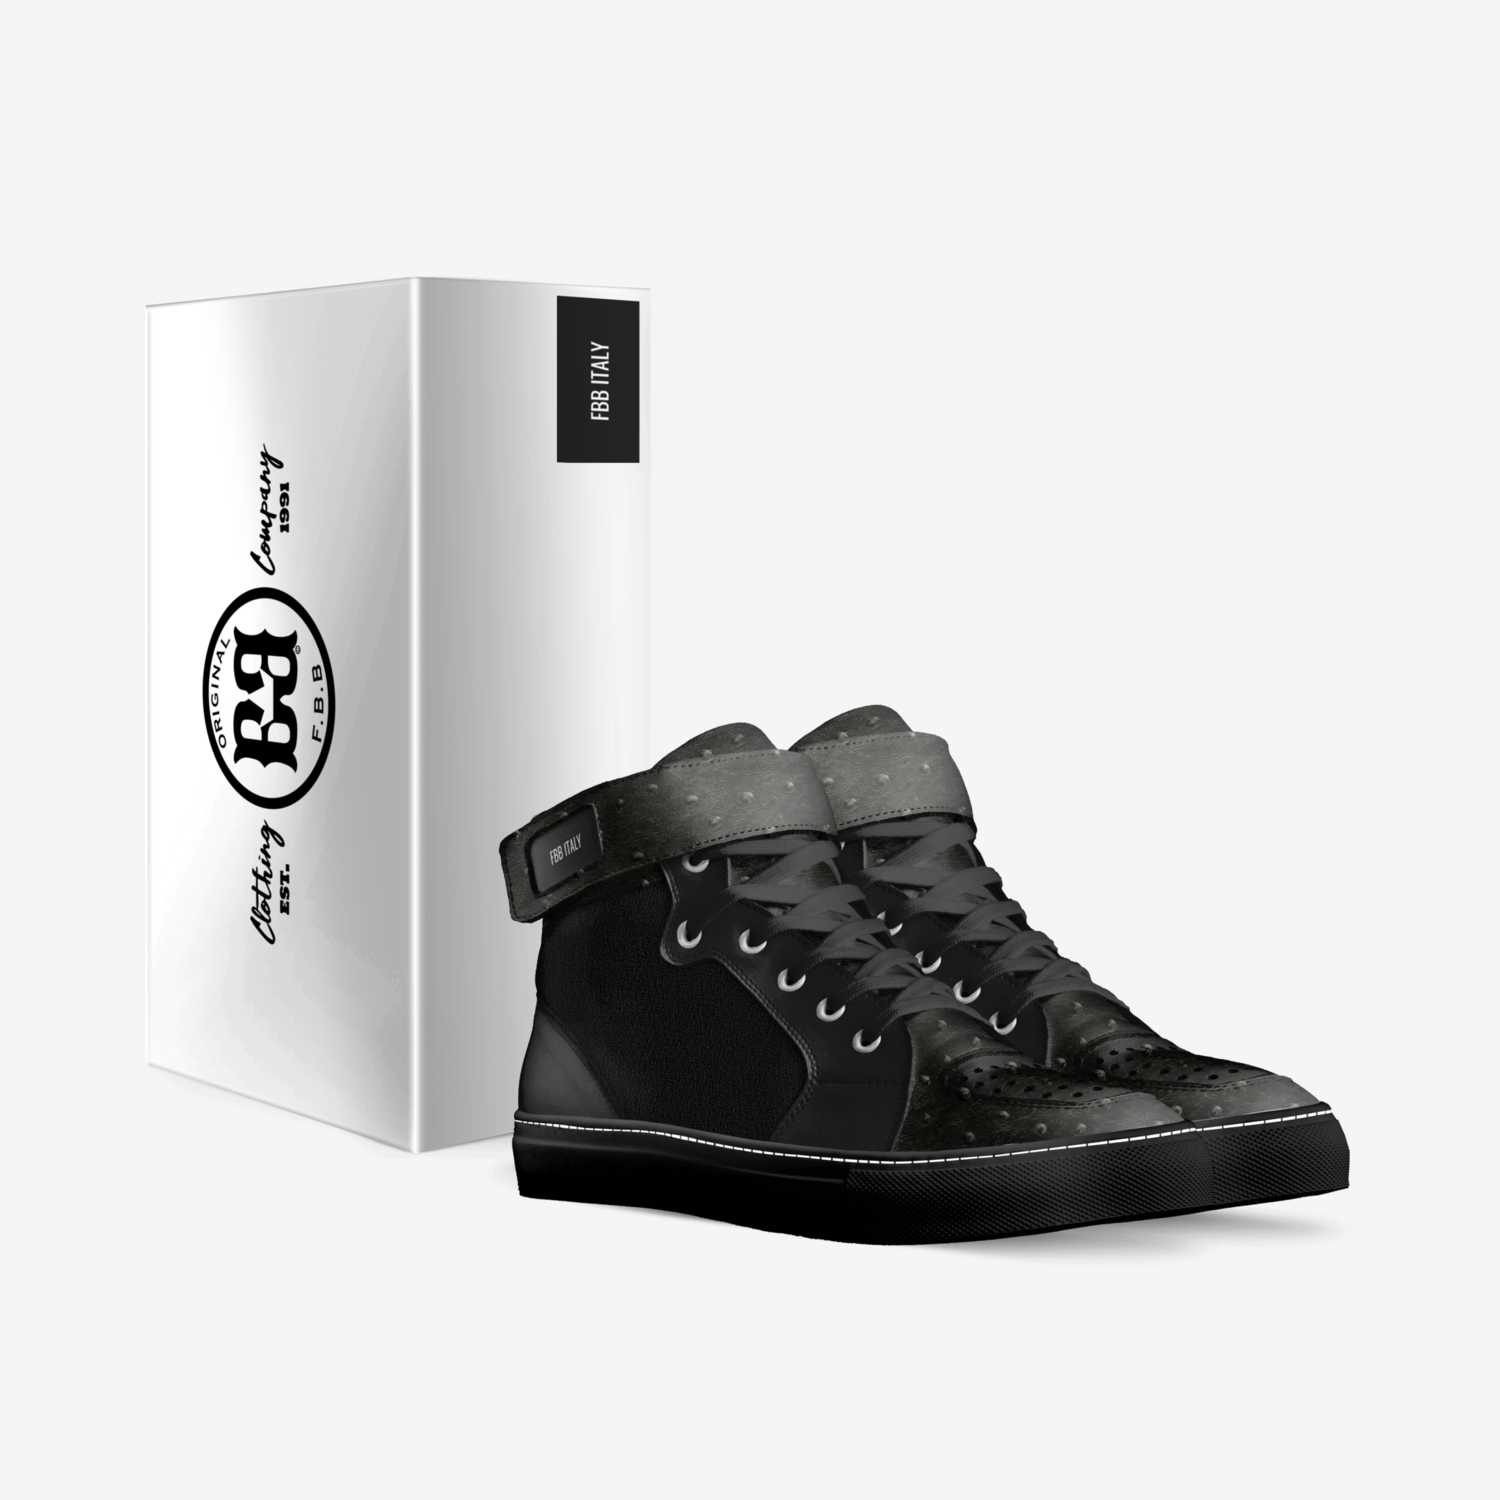 FBB custom made in Italy shoes by F. B. B. | Box view